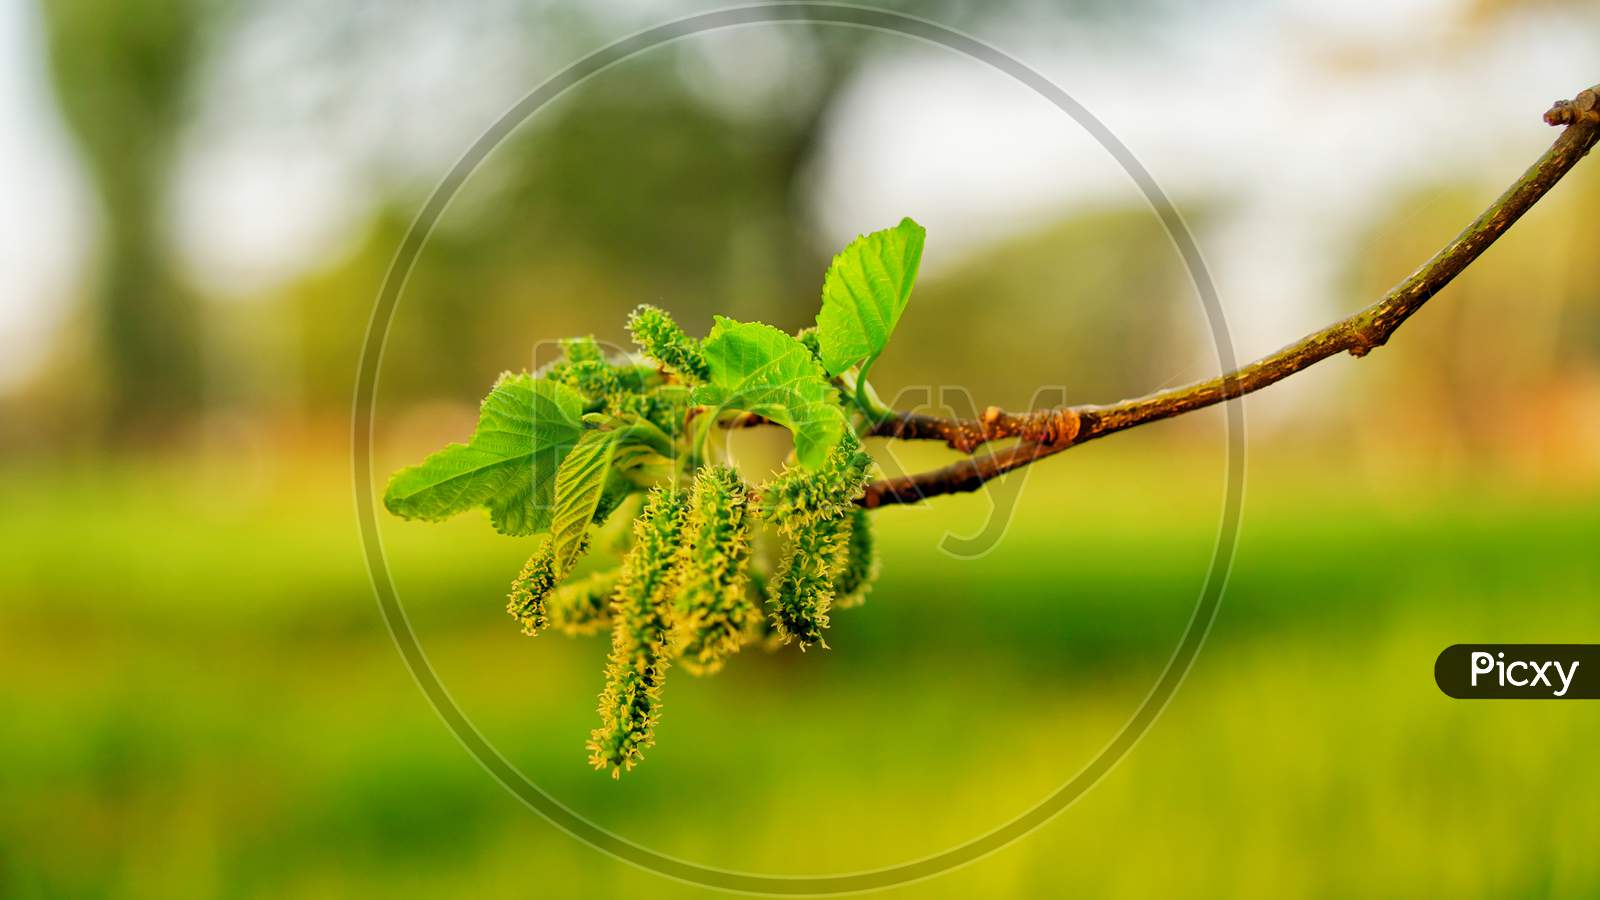 Mulberry Fruits With Leaves. Fast Growing, Small To Medium Sized Mulberry Tree Flowers With Green Leaves With Attractive Green Background.